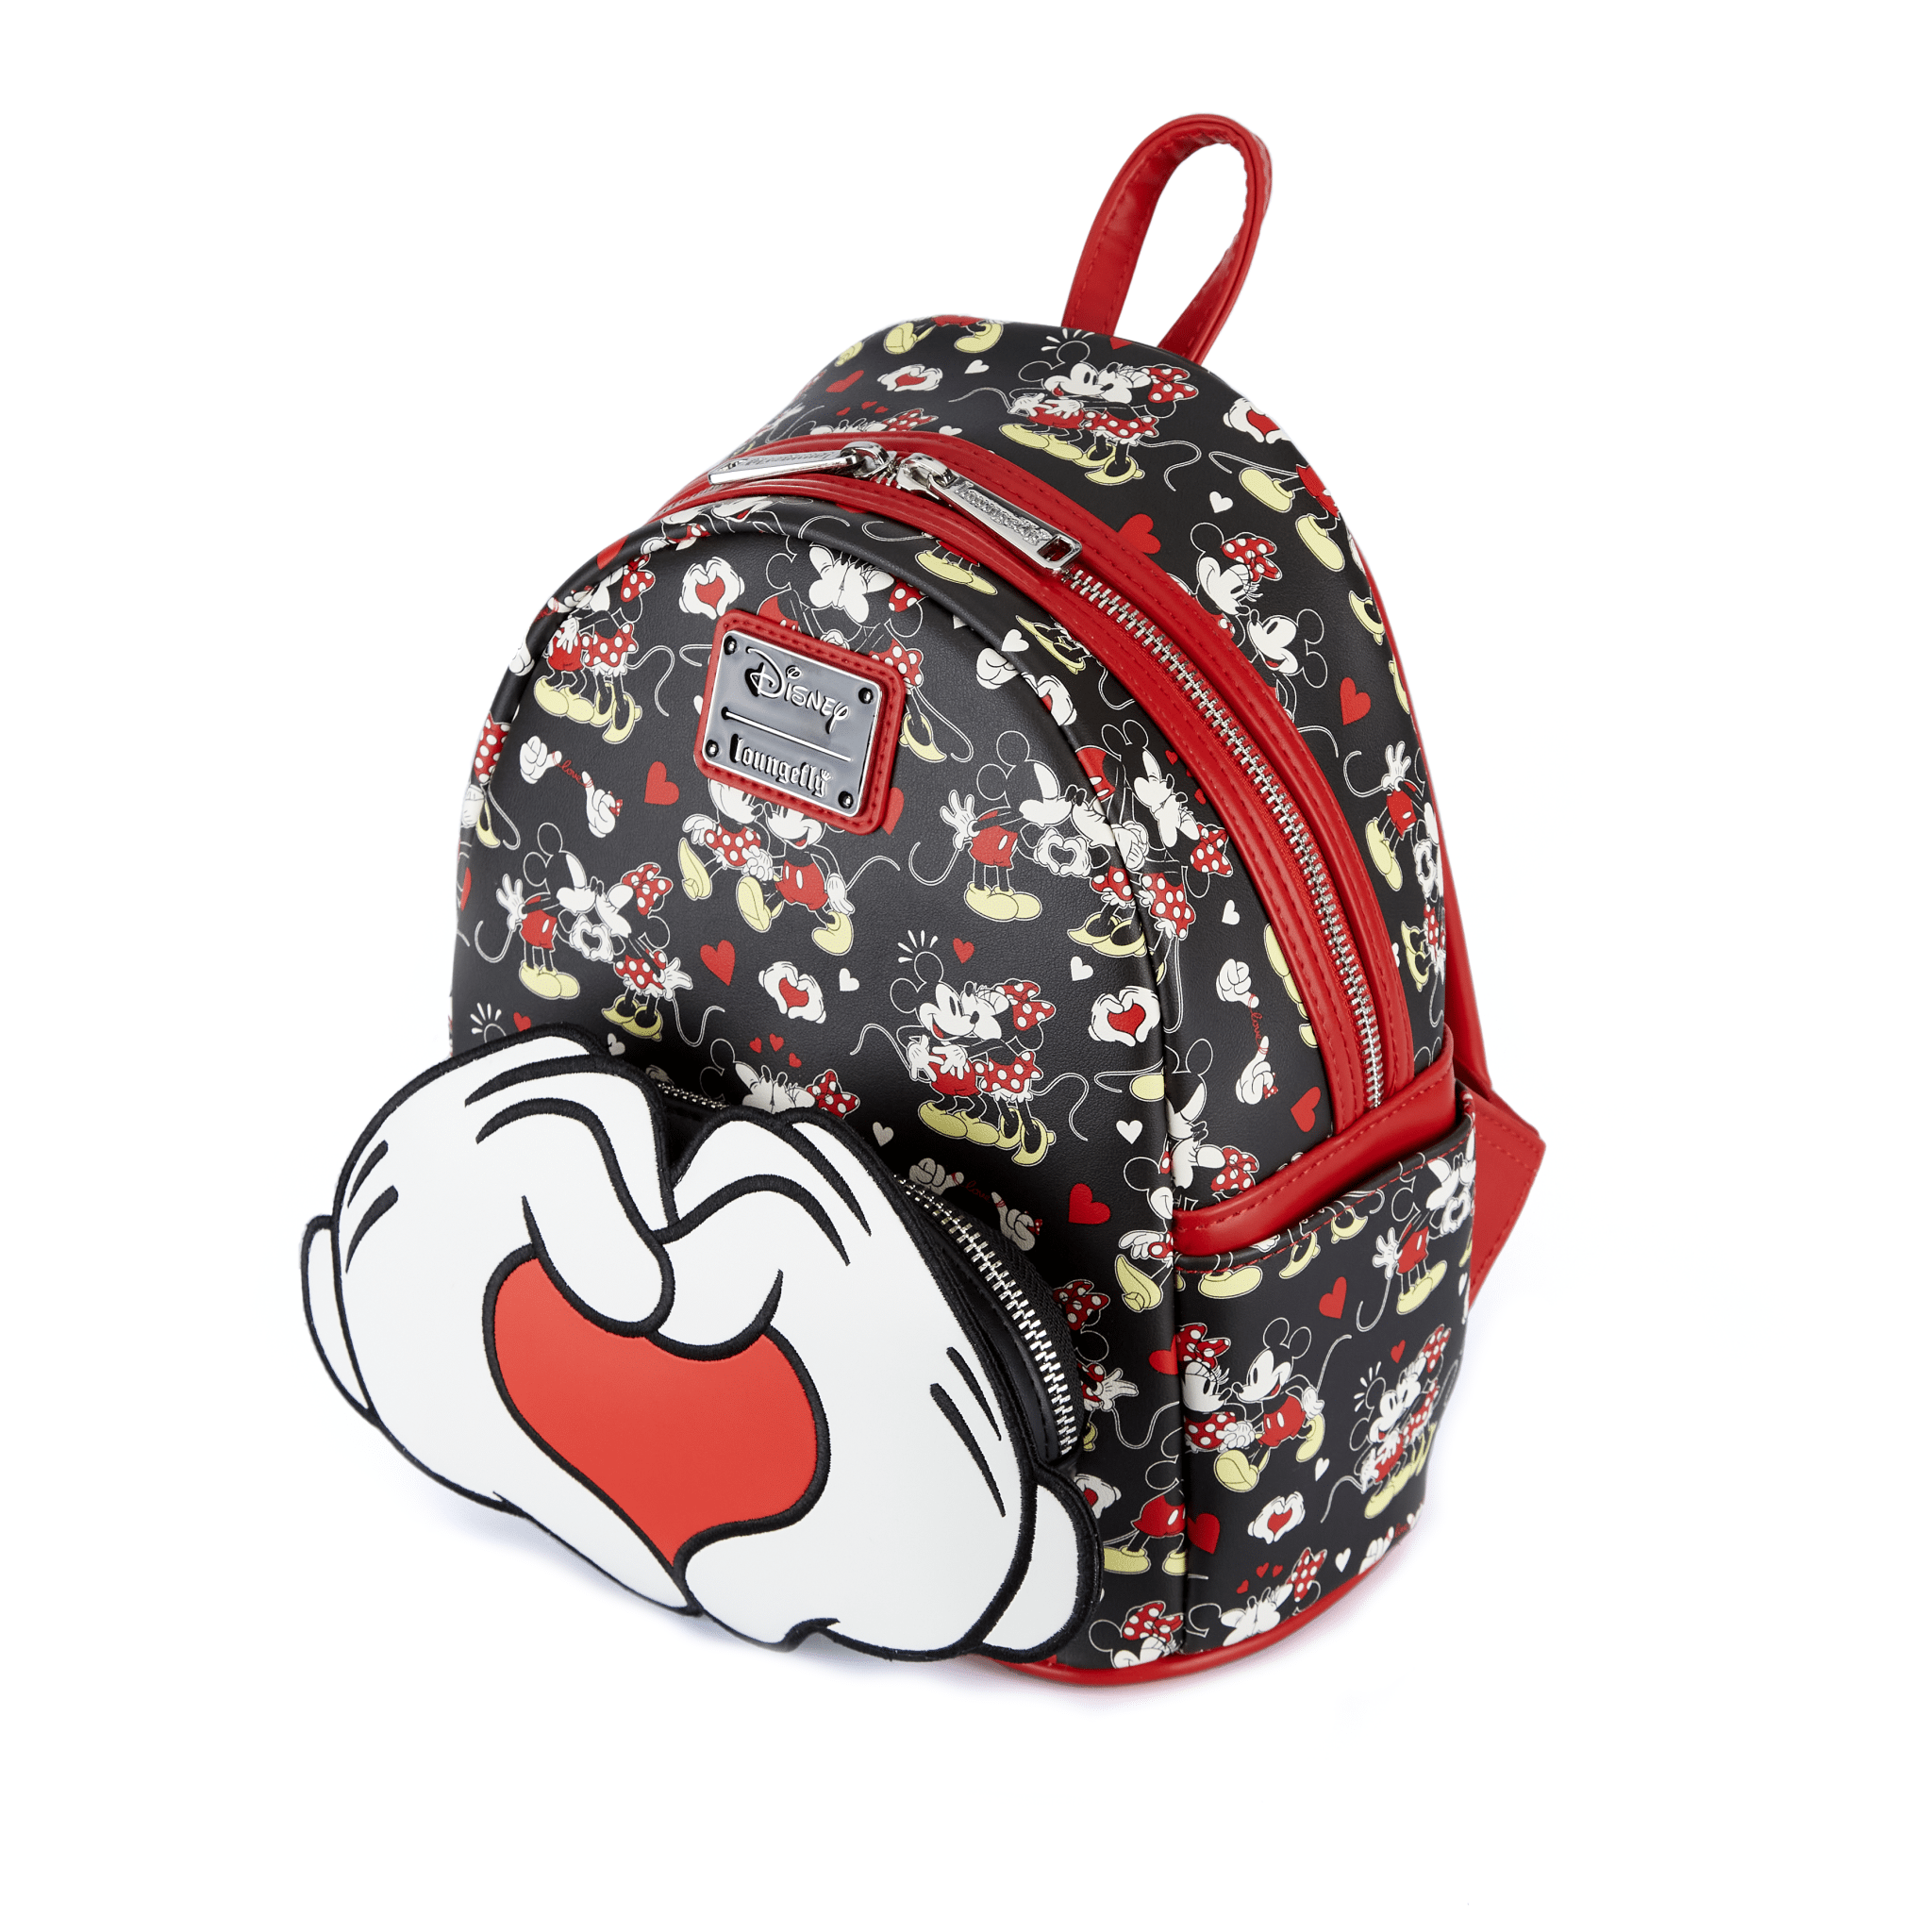 Loungefly x Disney Mickey Minnie Mouse Heart Hands Mini Backpack - GeekCore